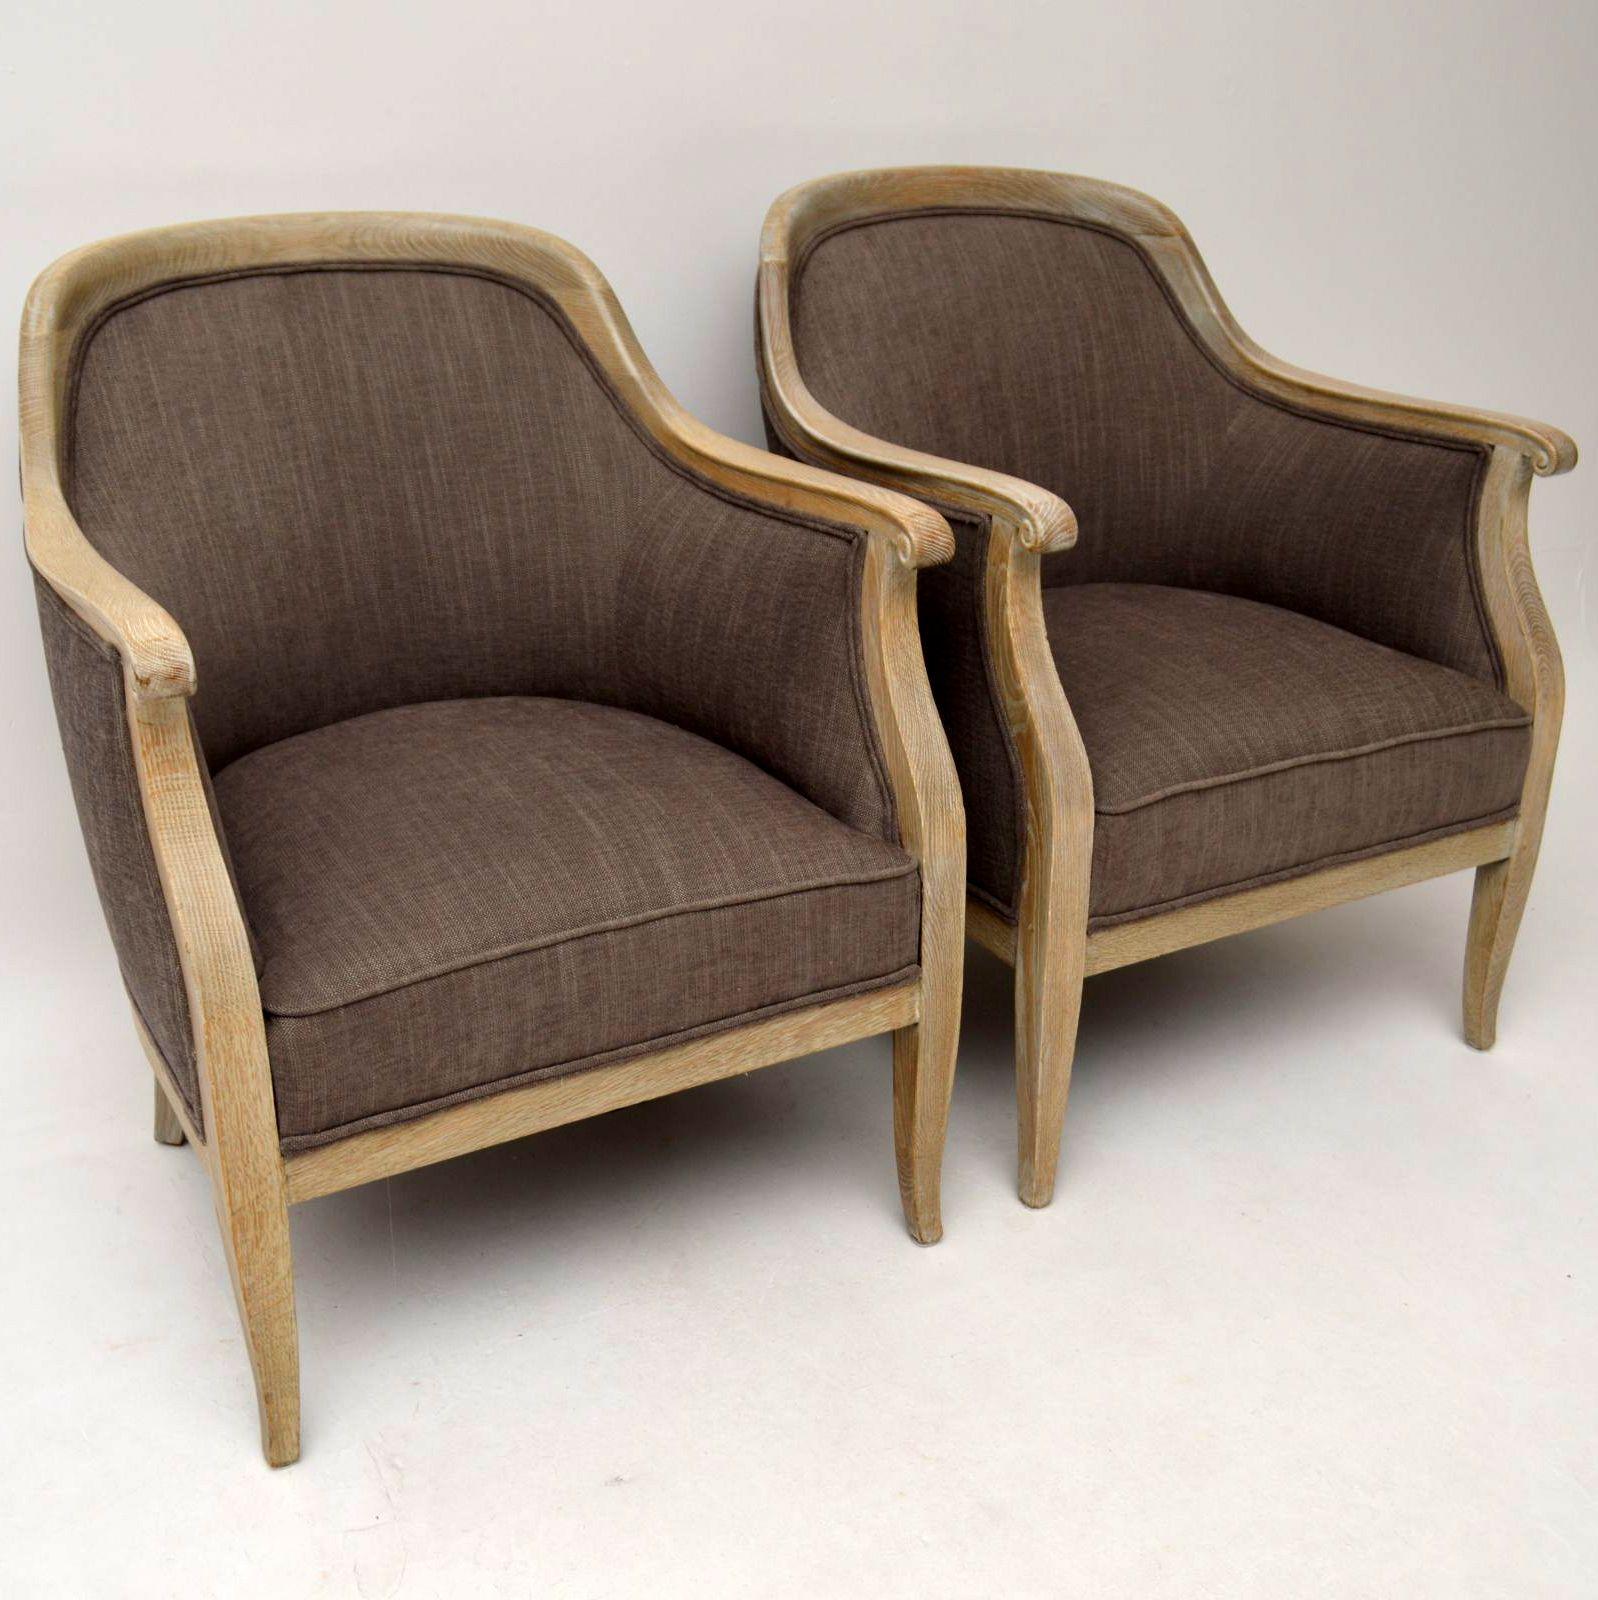 Pair of Antique Swedish Bleached Oak Upholstered Armchairs 1